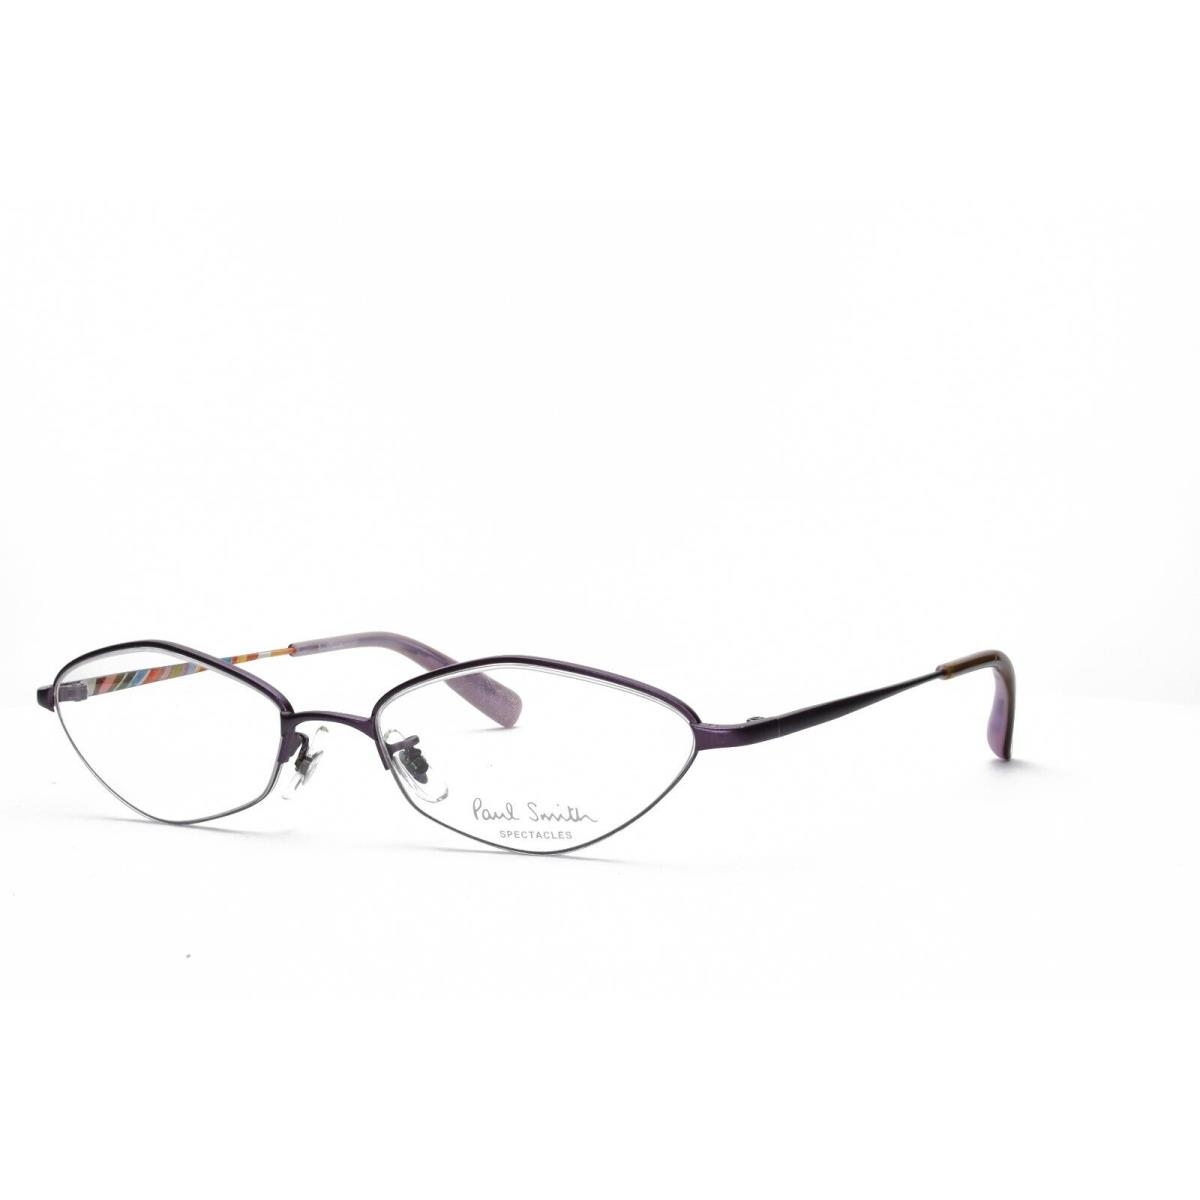 Paul Smith PS 1003 Pur Eyeglasses Frames Only 51-17-138